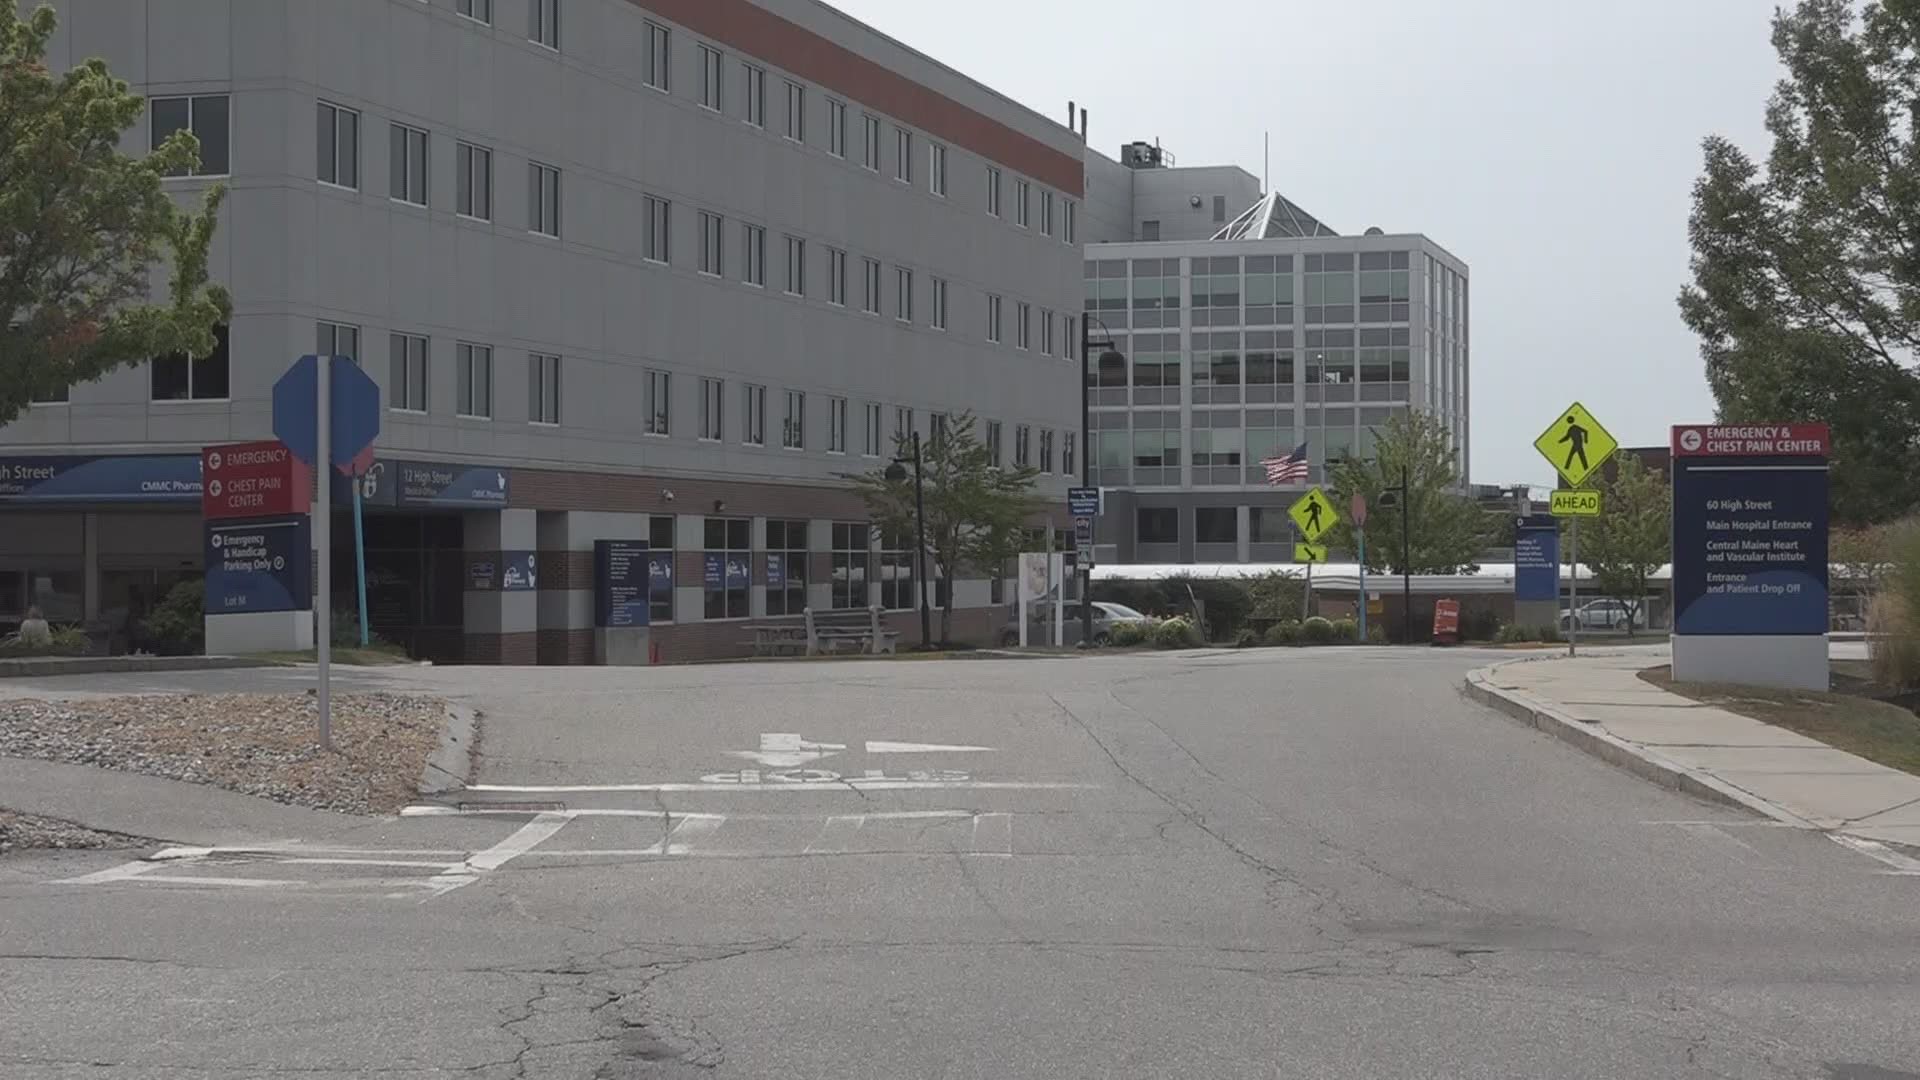 Tuesday afternoon Central Maine Medical Center said the call from a person threatening to shoot up the hospital is no longer credible.